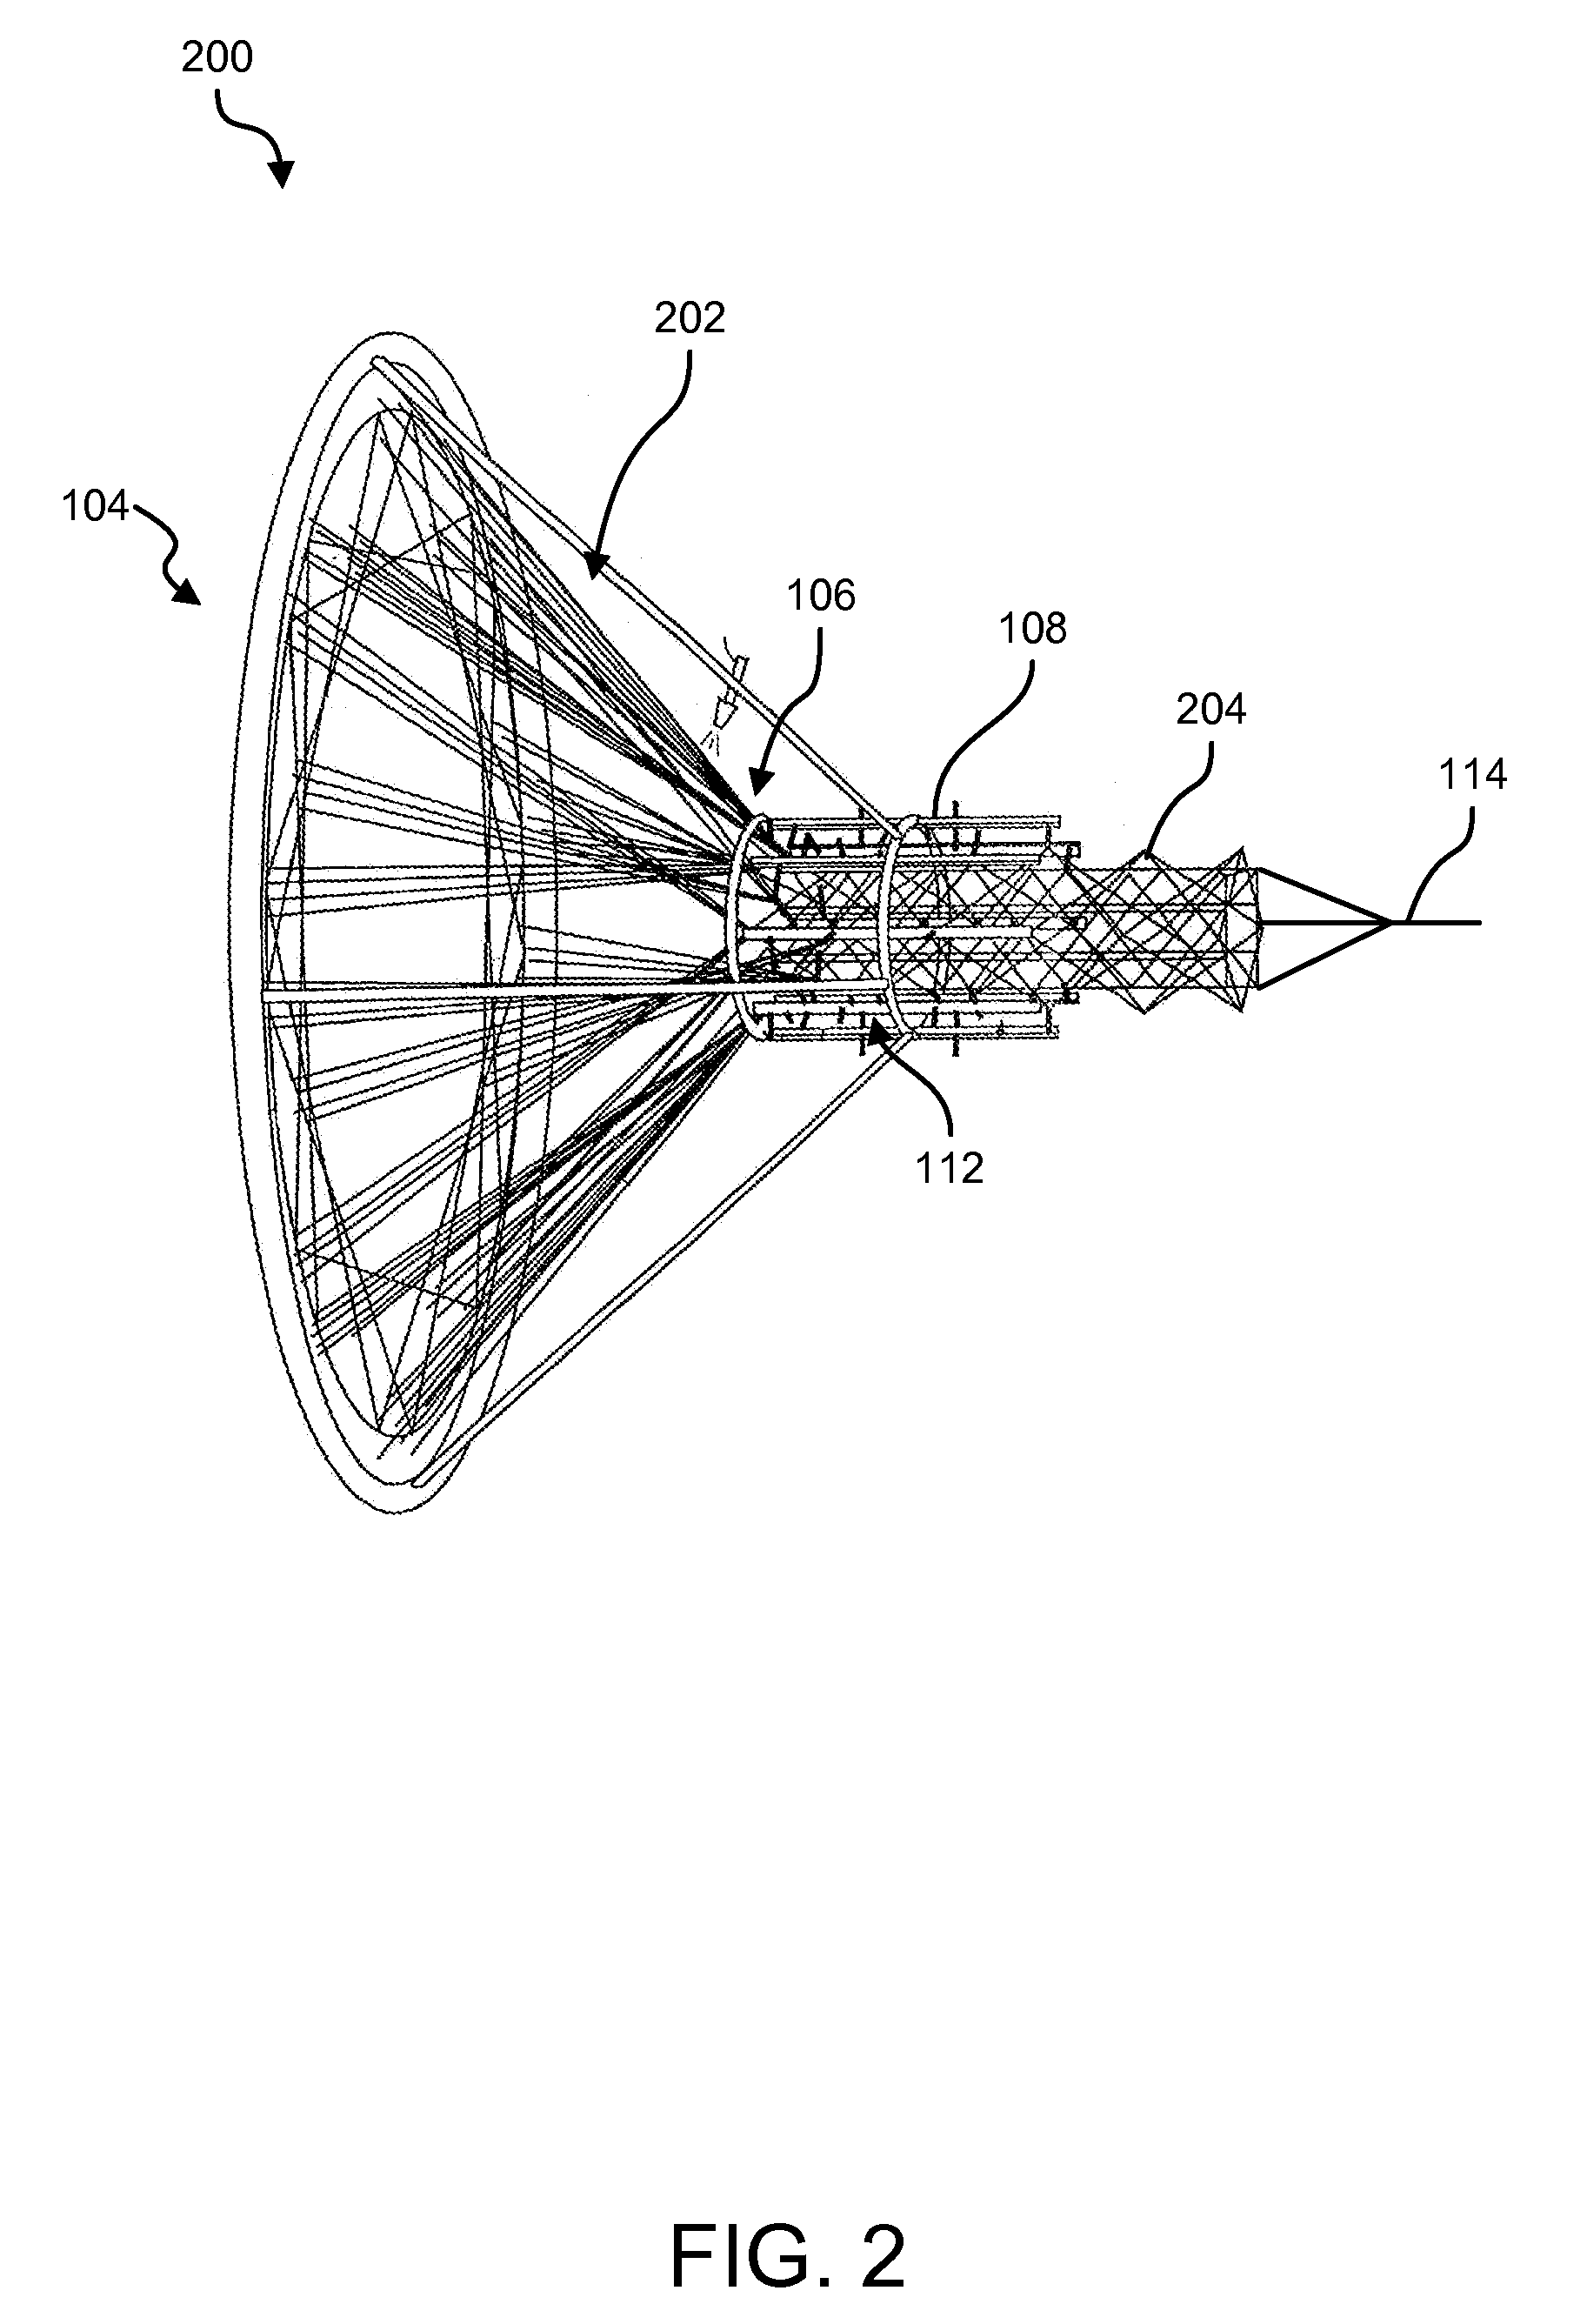 Apparatus, System, and Method for Filamentary Composite Lattice Structure Manufacturing